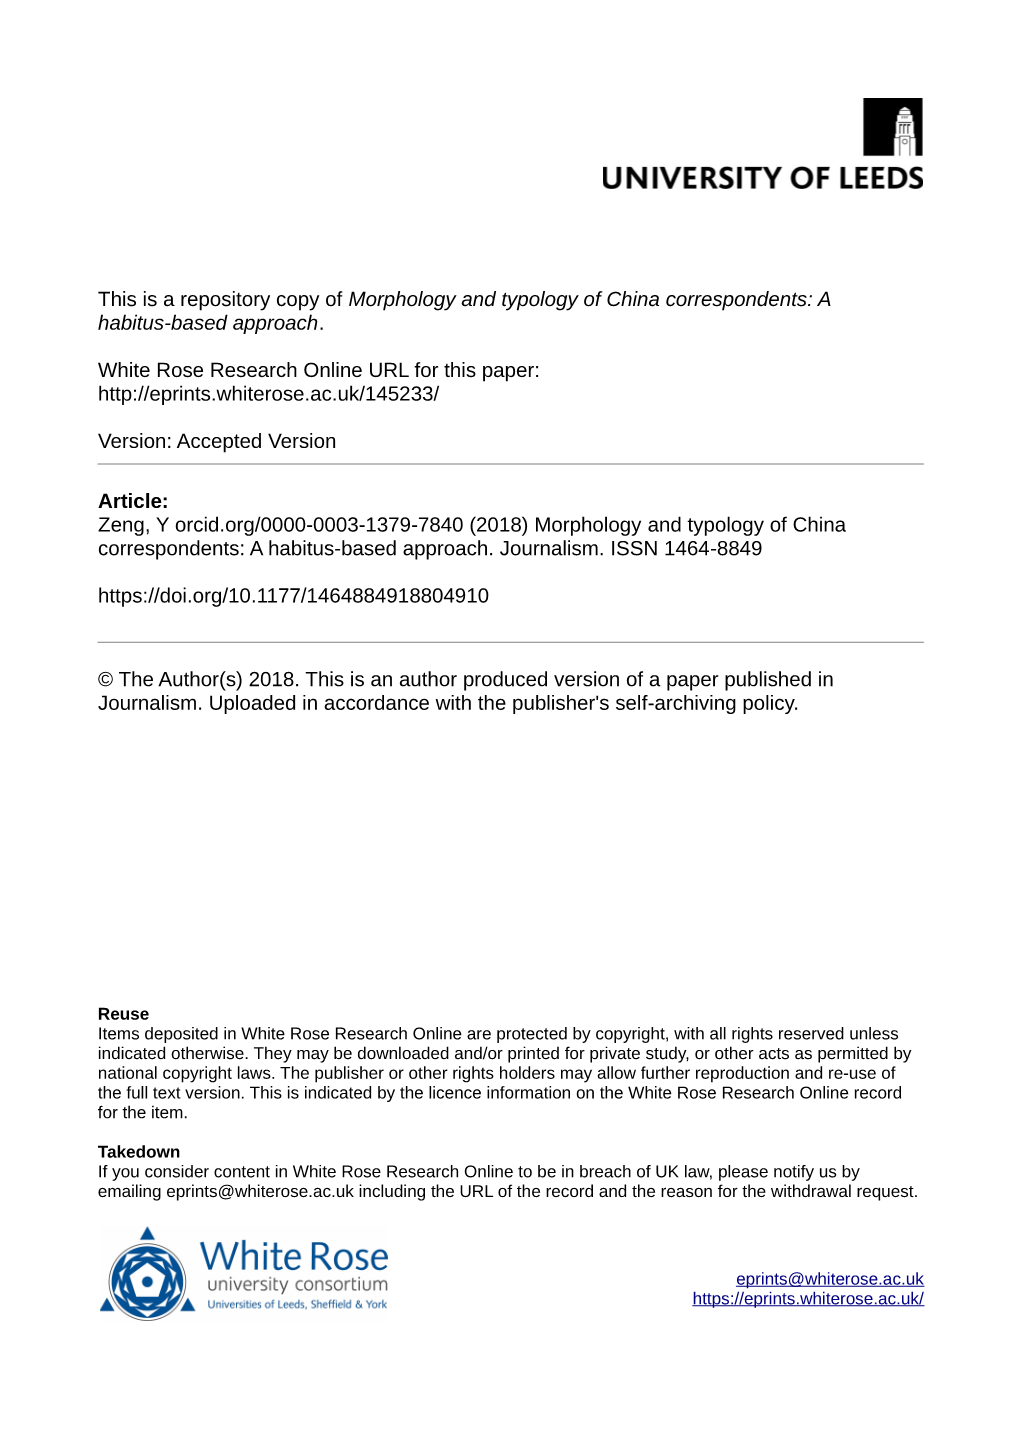 Morphology and Typology of China Correspondents: a Habitus-Based Approach